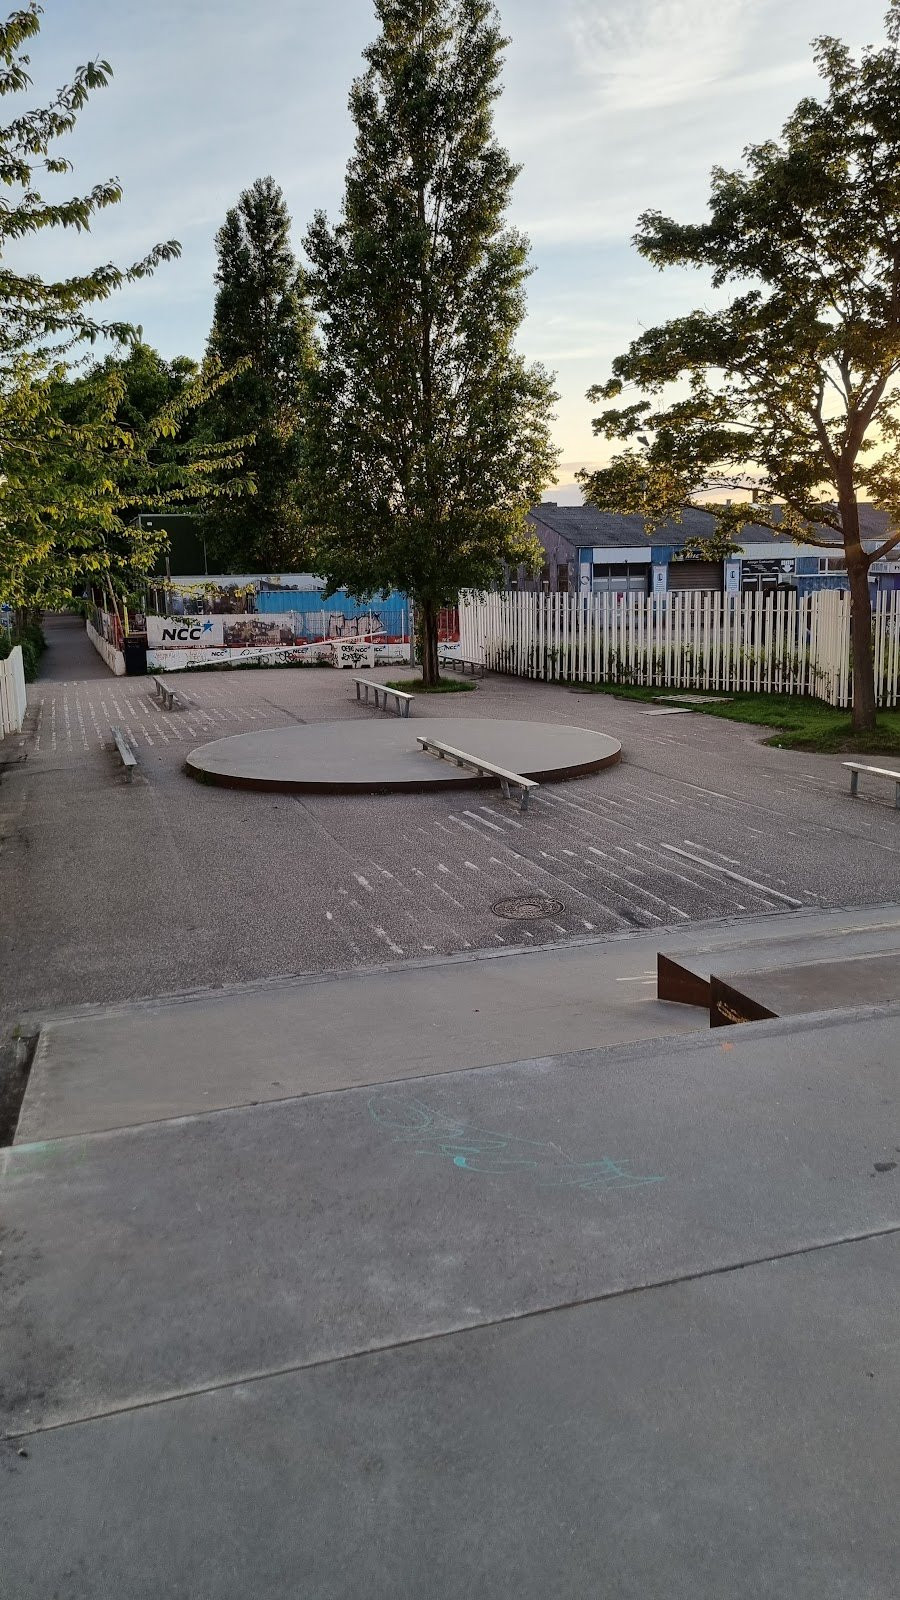 The Skatepark is located at the end of Prags Boulevard and is a small, pleasant skatepark with several ledges, a manual pad and a bank at the end. The bank has ledges that can be skated.The park is oblong which makes it easy to gain and maintain speed and flow.